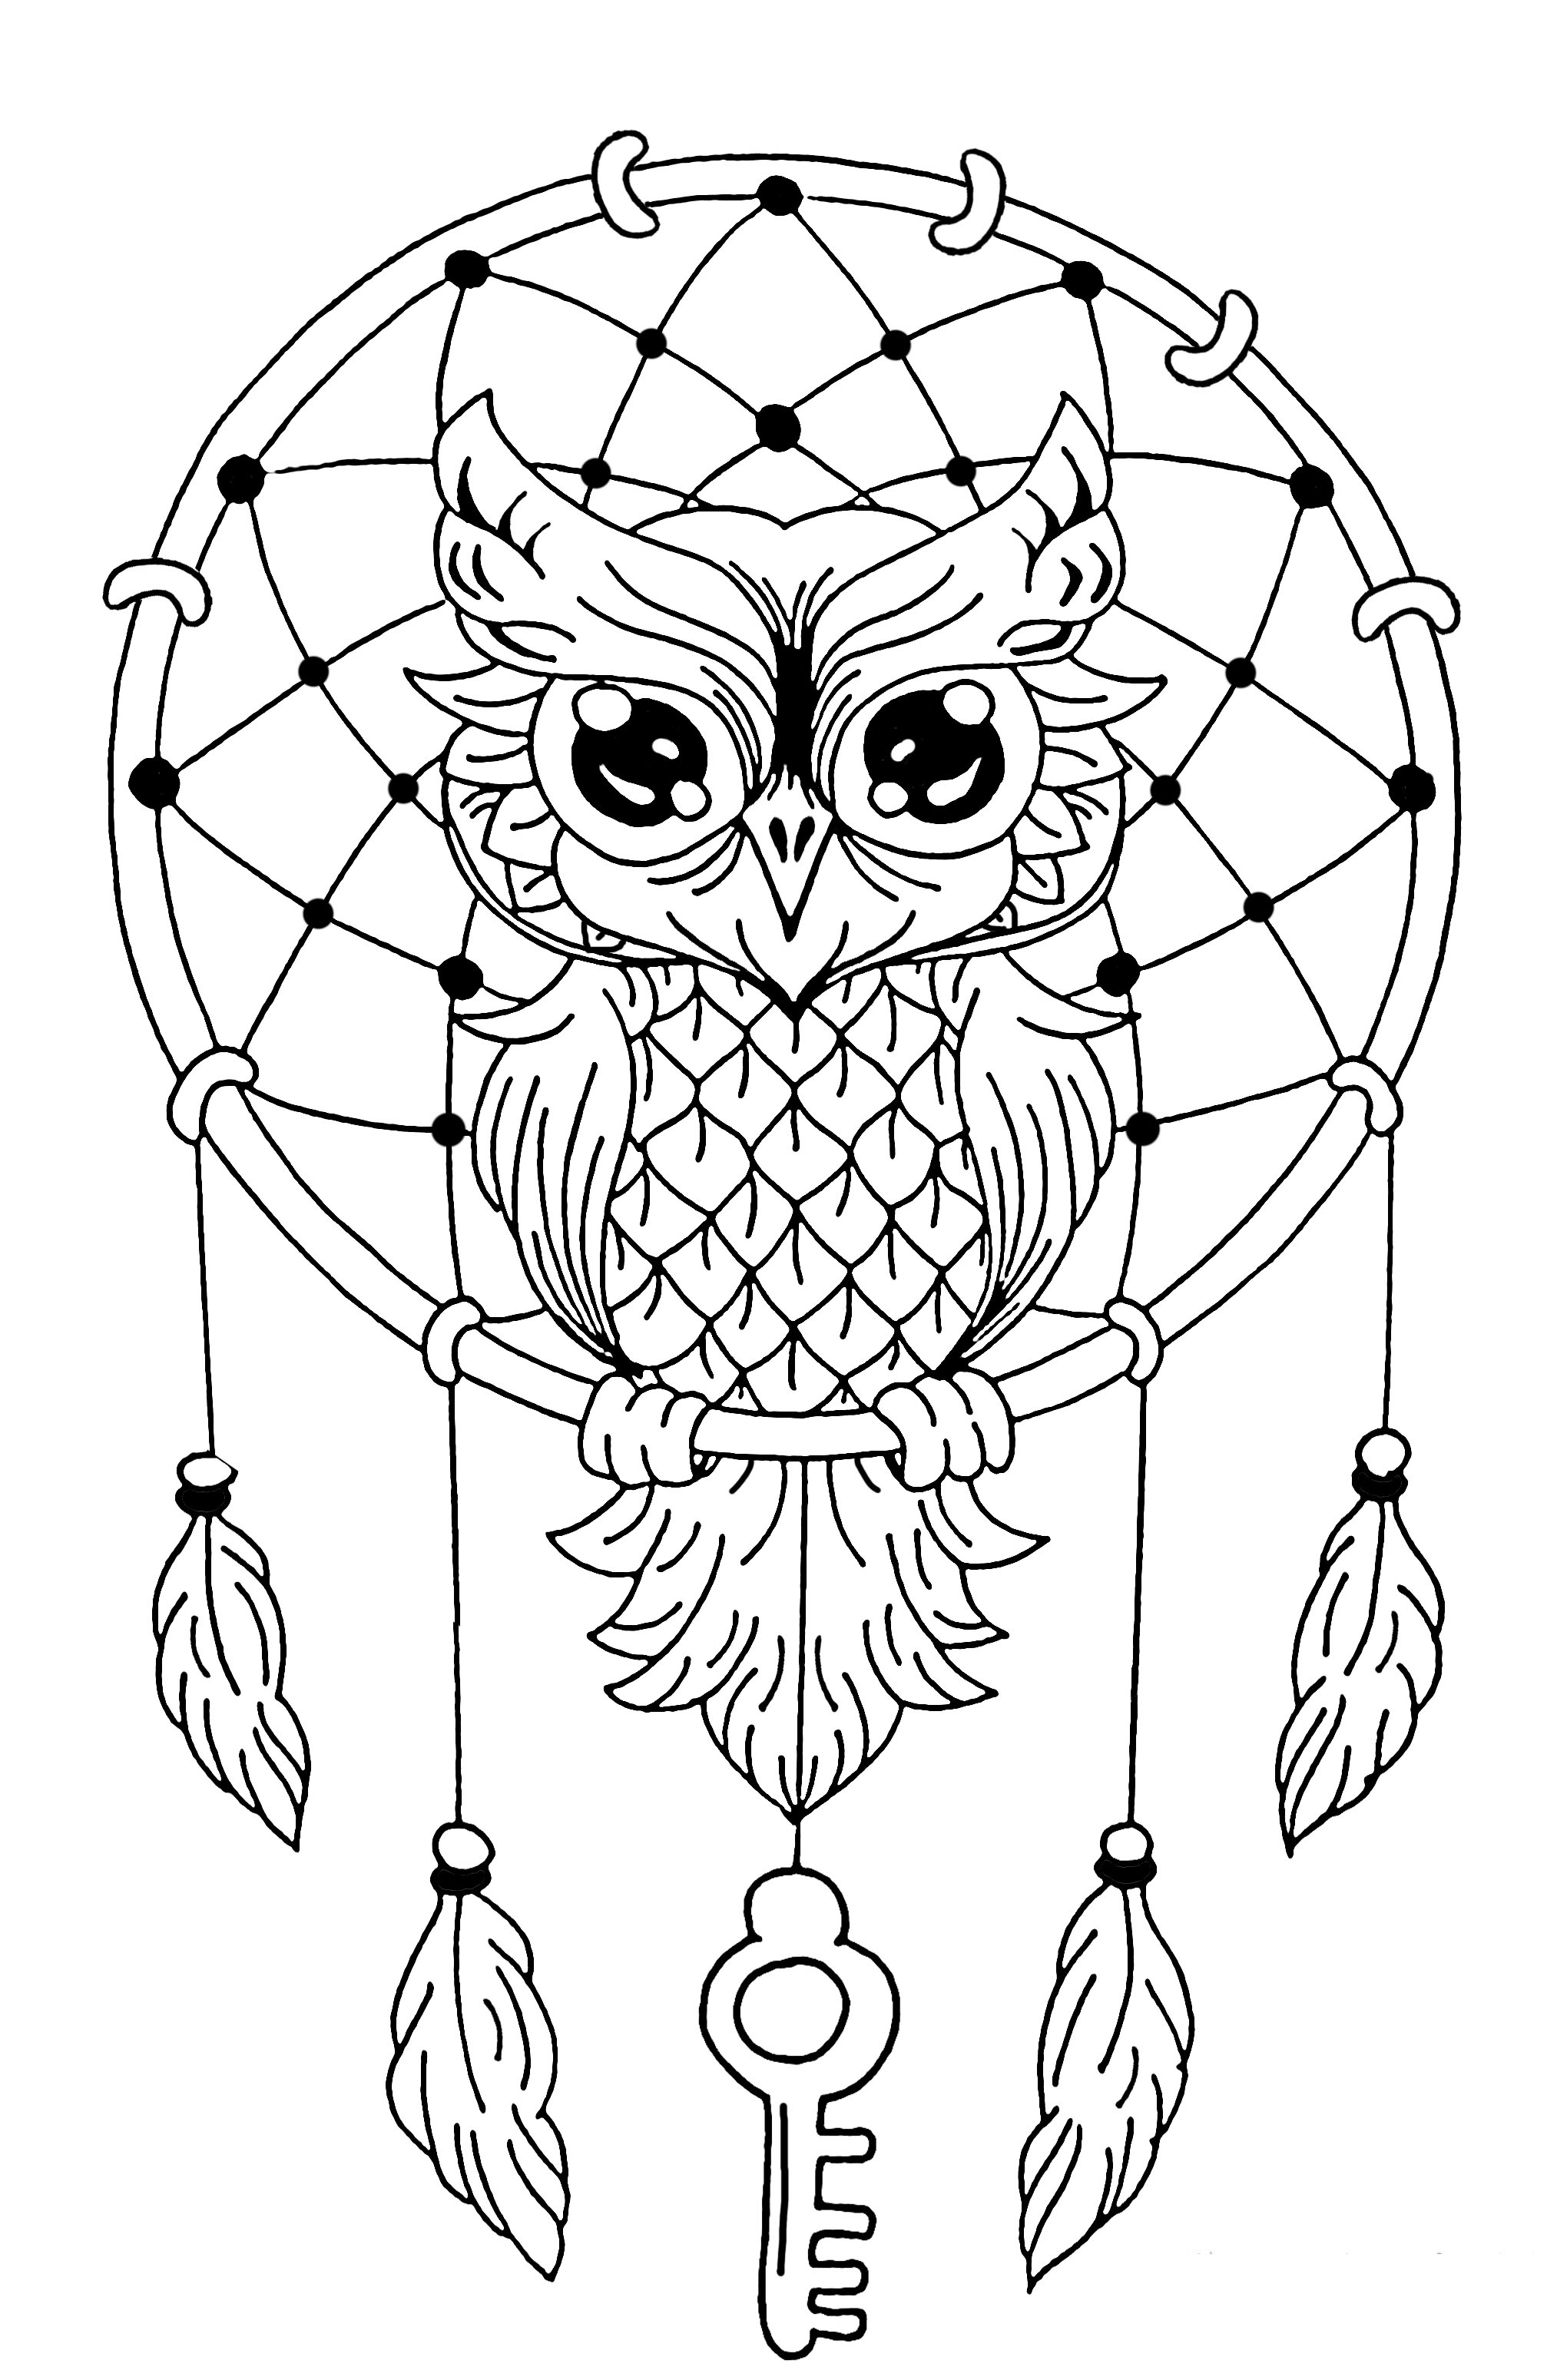 Dream Catcher Coloring Page For Kids